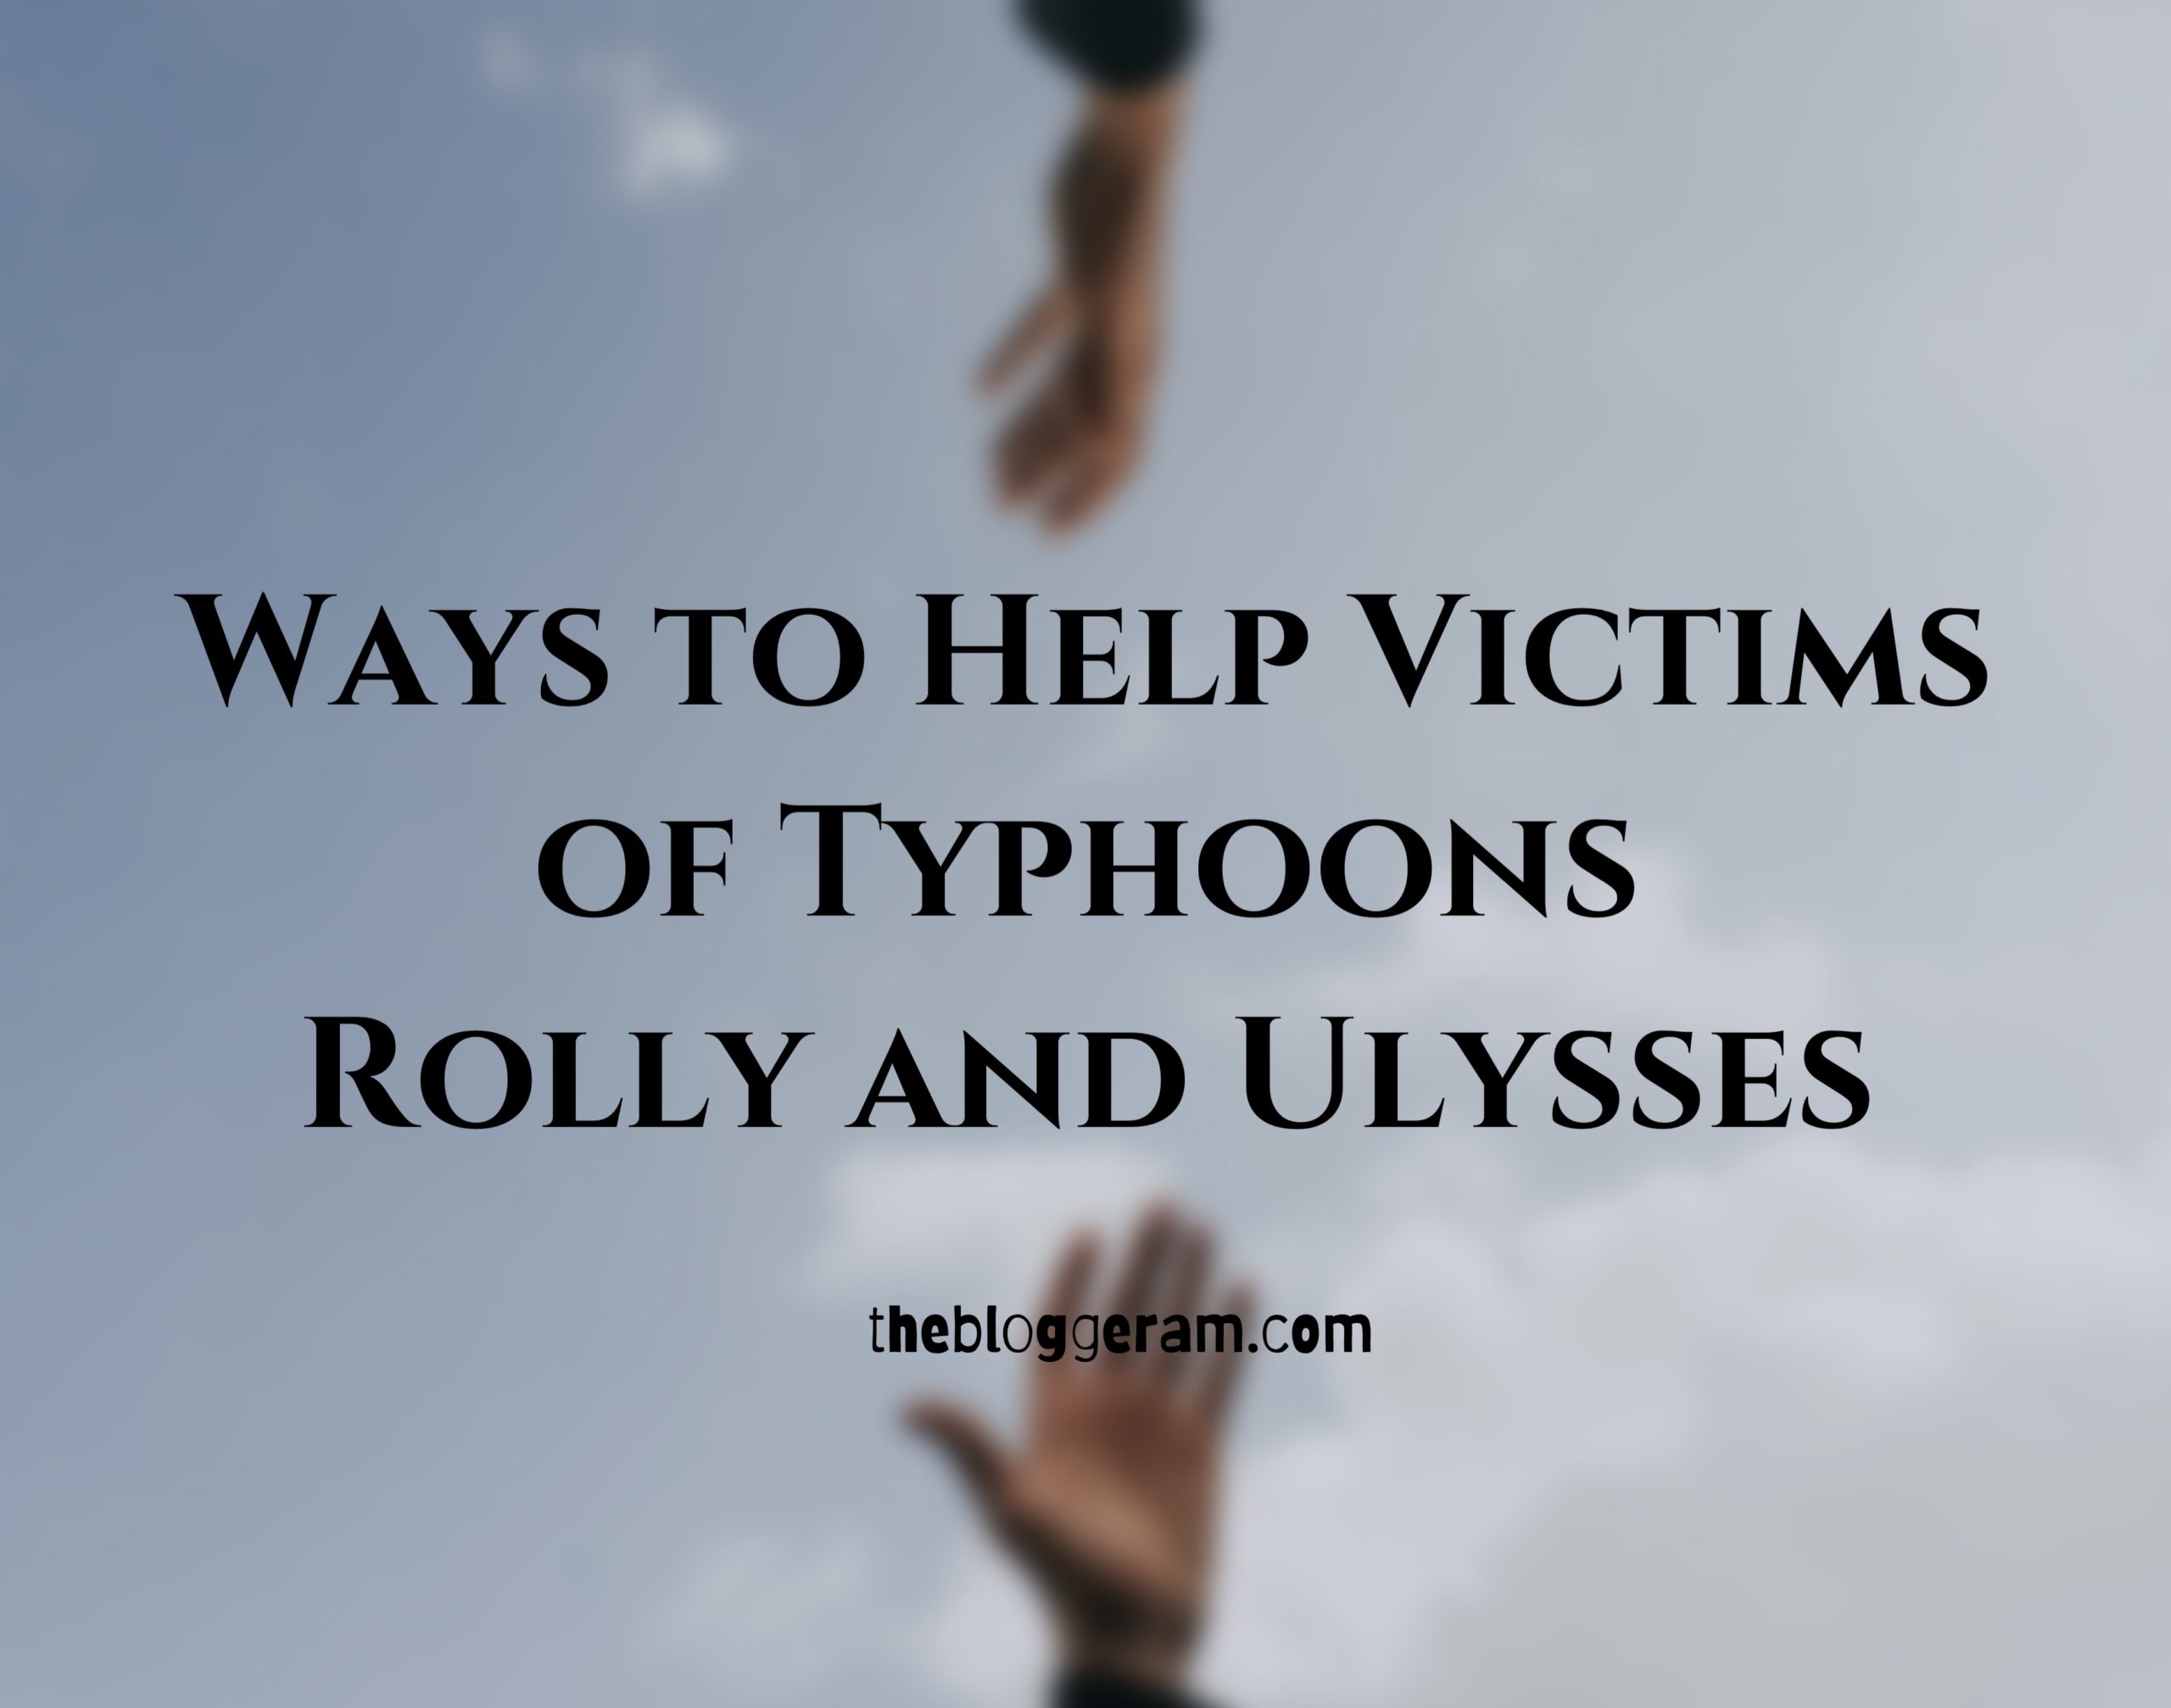 Ways to Help the Victims of Typhoons Rolly and Ulysses